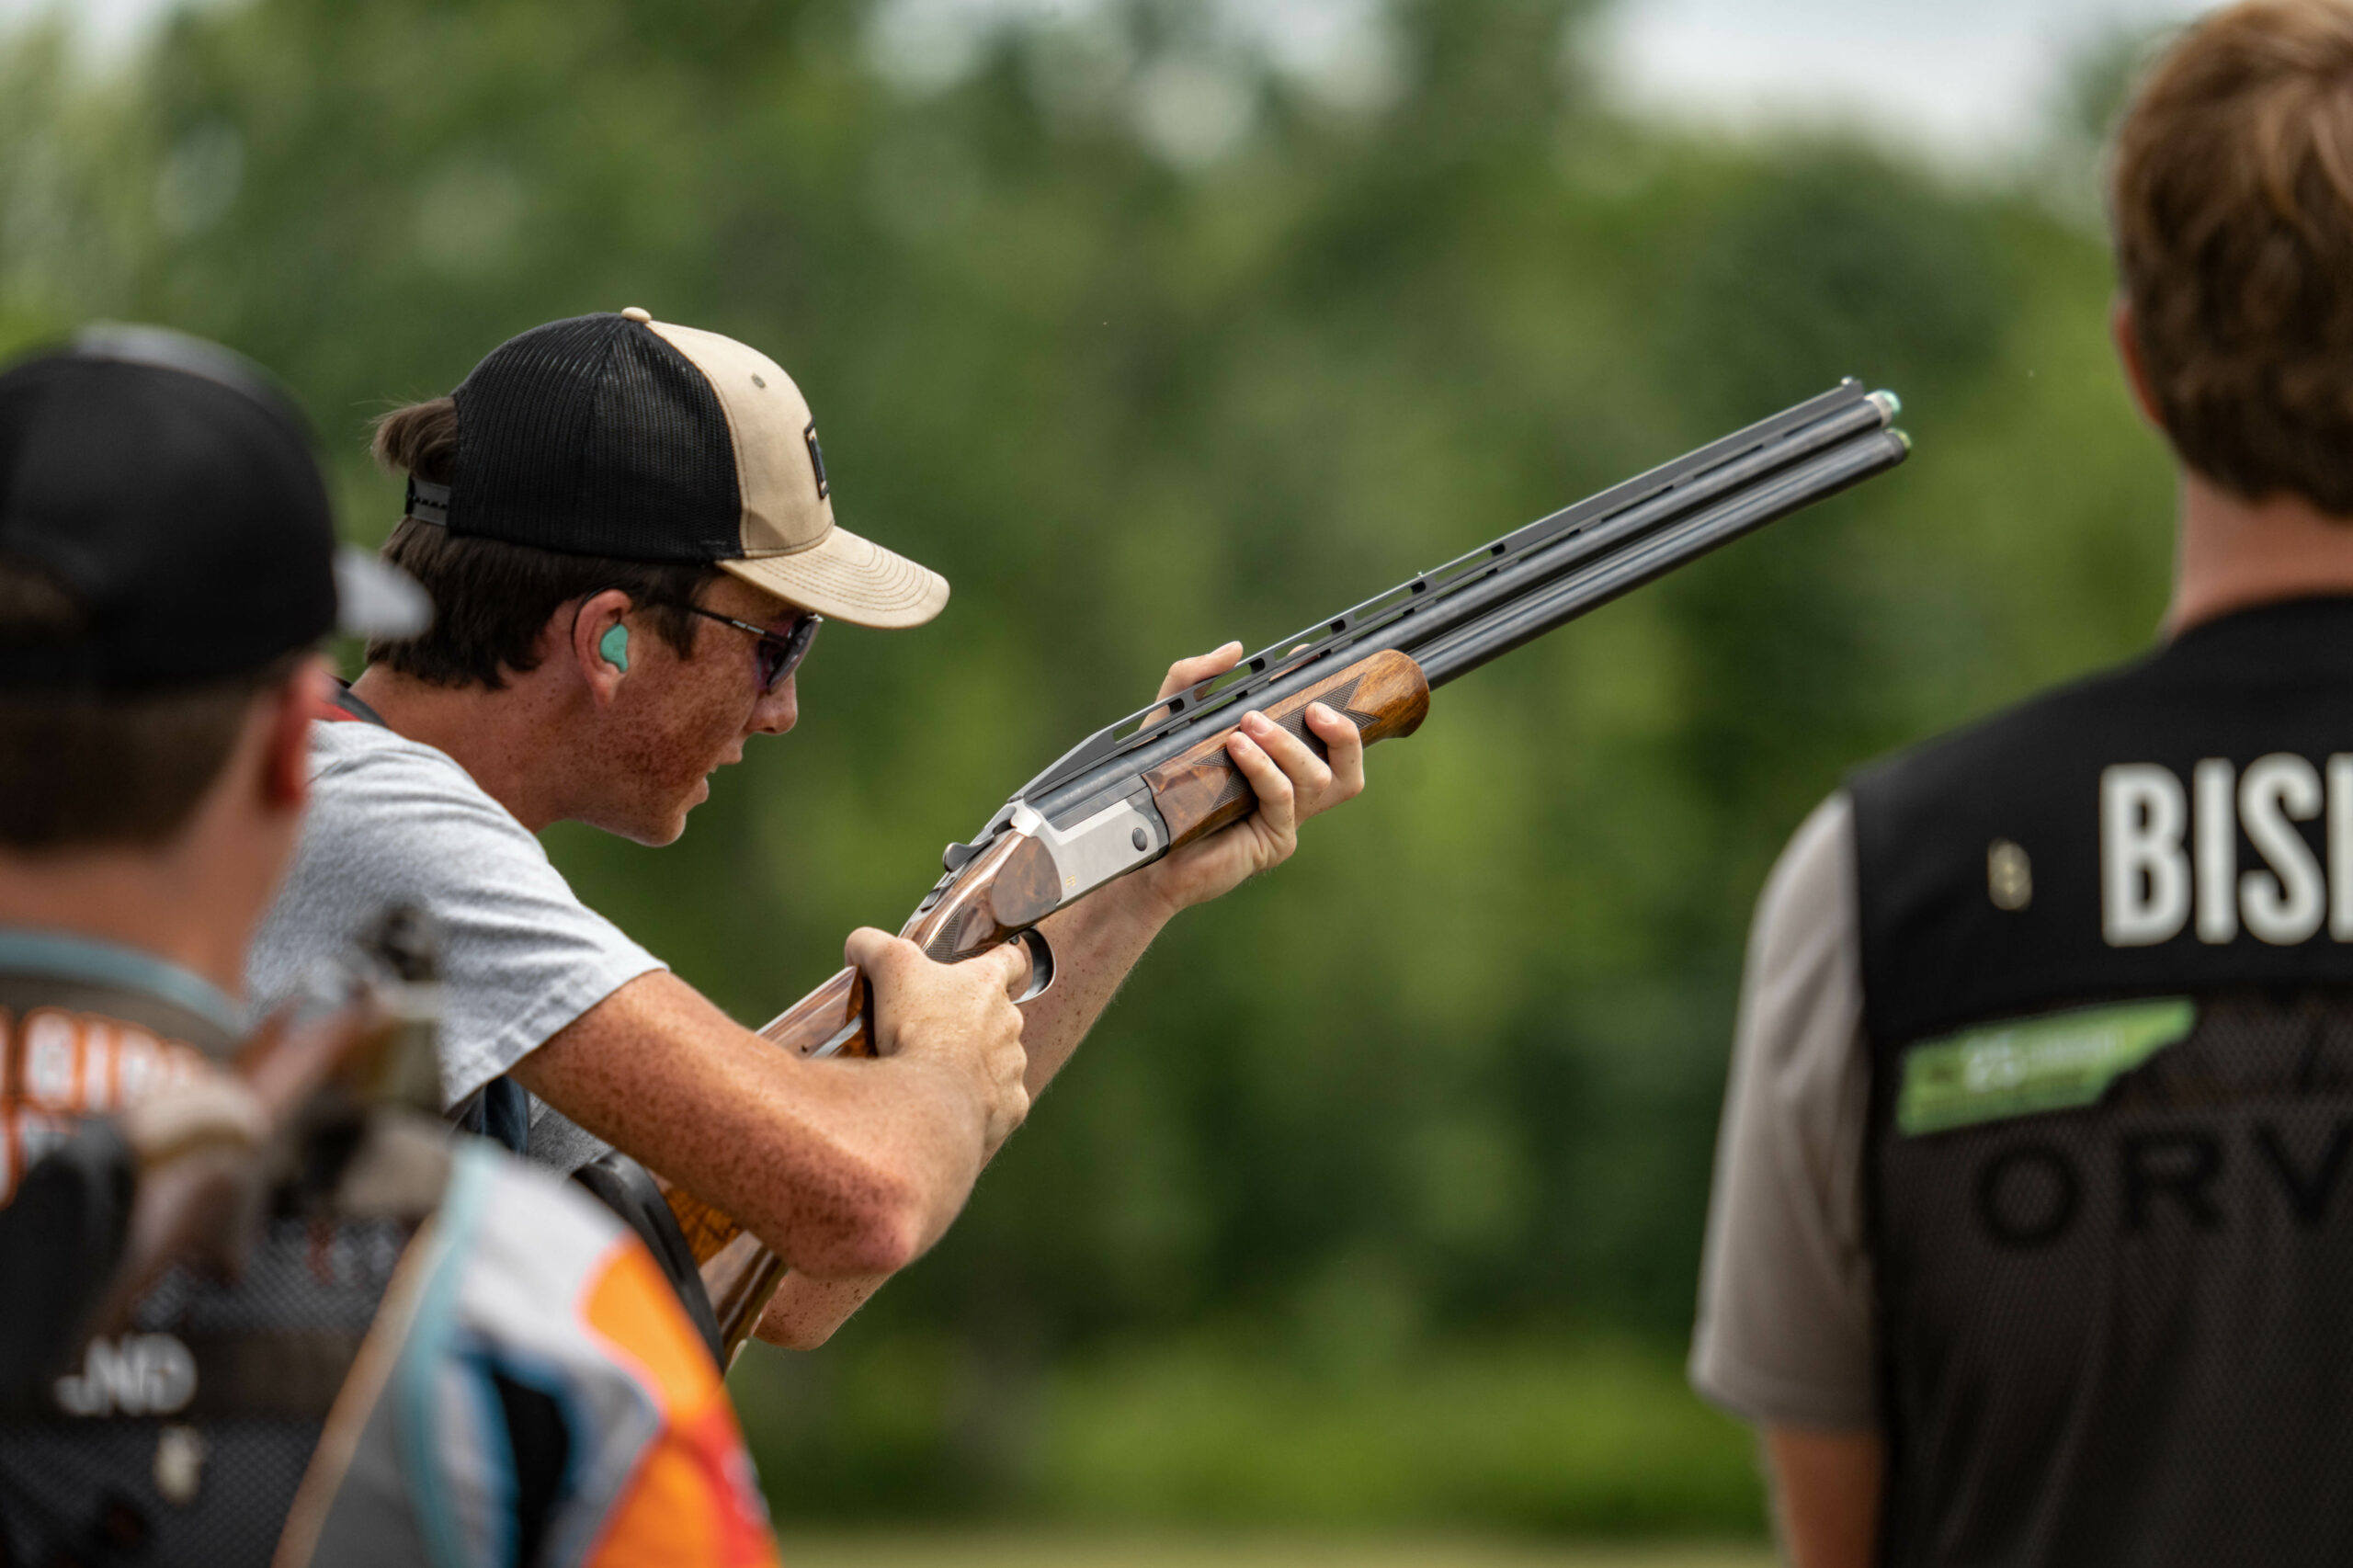 Home Training Exercises for Shooting Sports